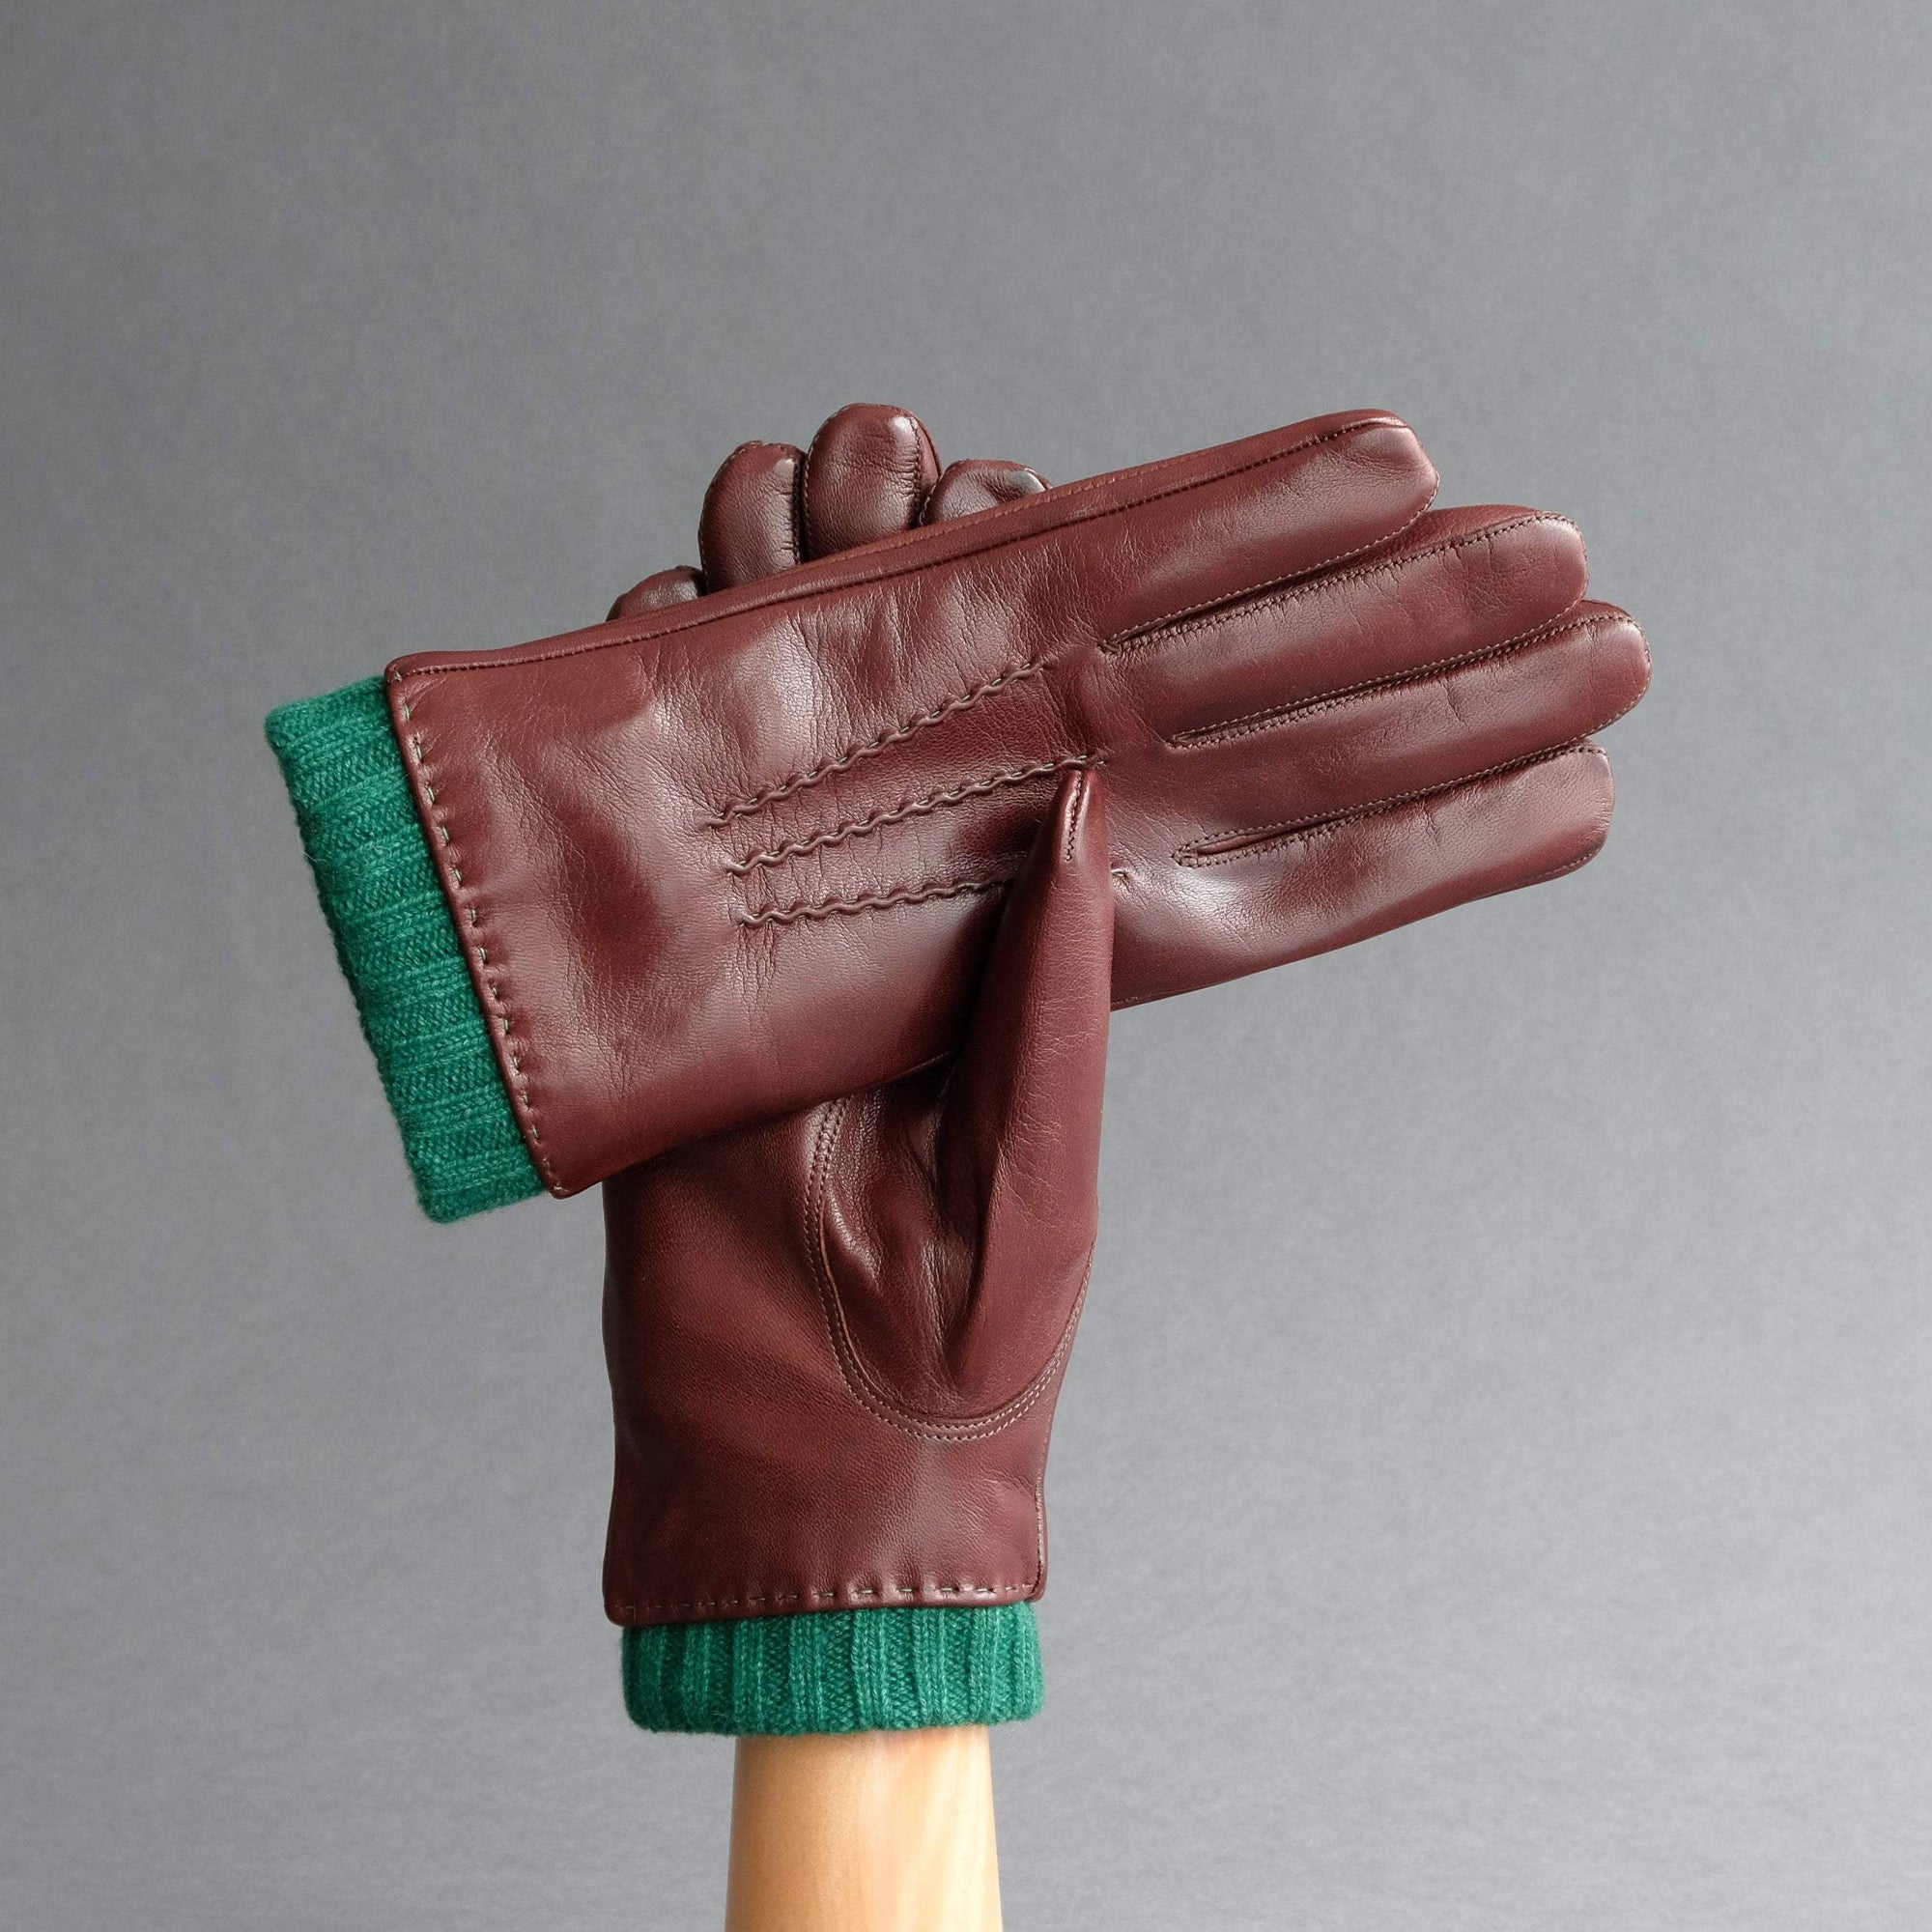 Gentlemen&#39;s Gloves from Brown/Tan Hair Sheep Nappa Lined With Cashmere - TR Handschuhe Wien - Thomas Riemer Handmade Gloves